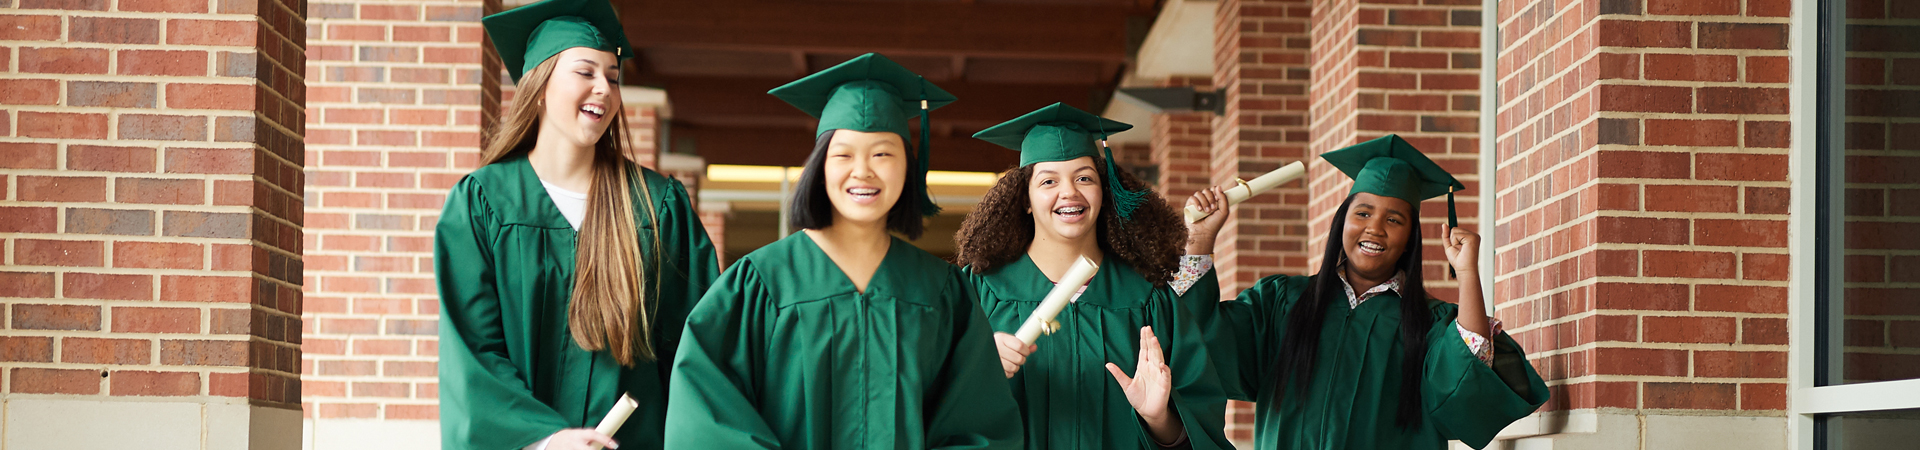  group of senior girls in caps and gowns with diplomas  